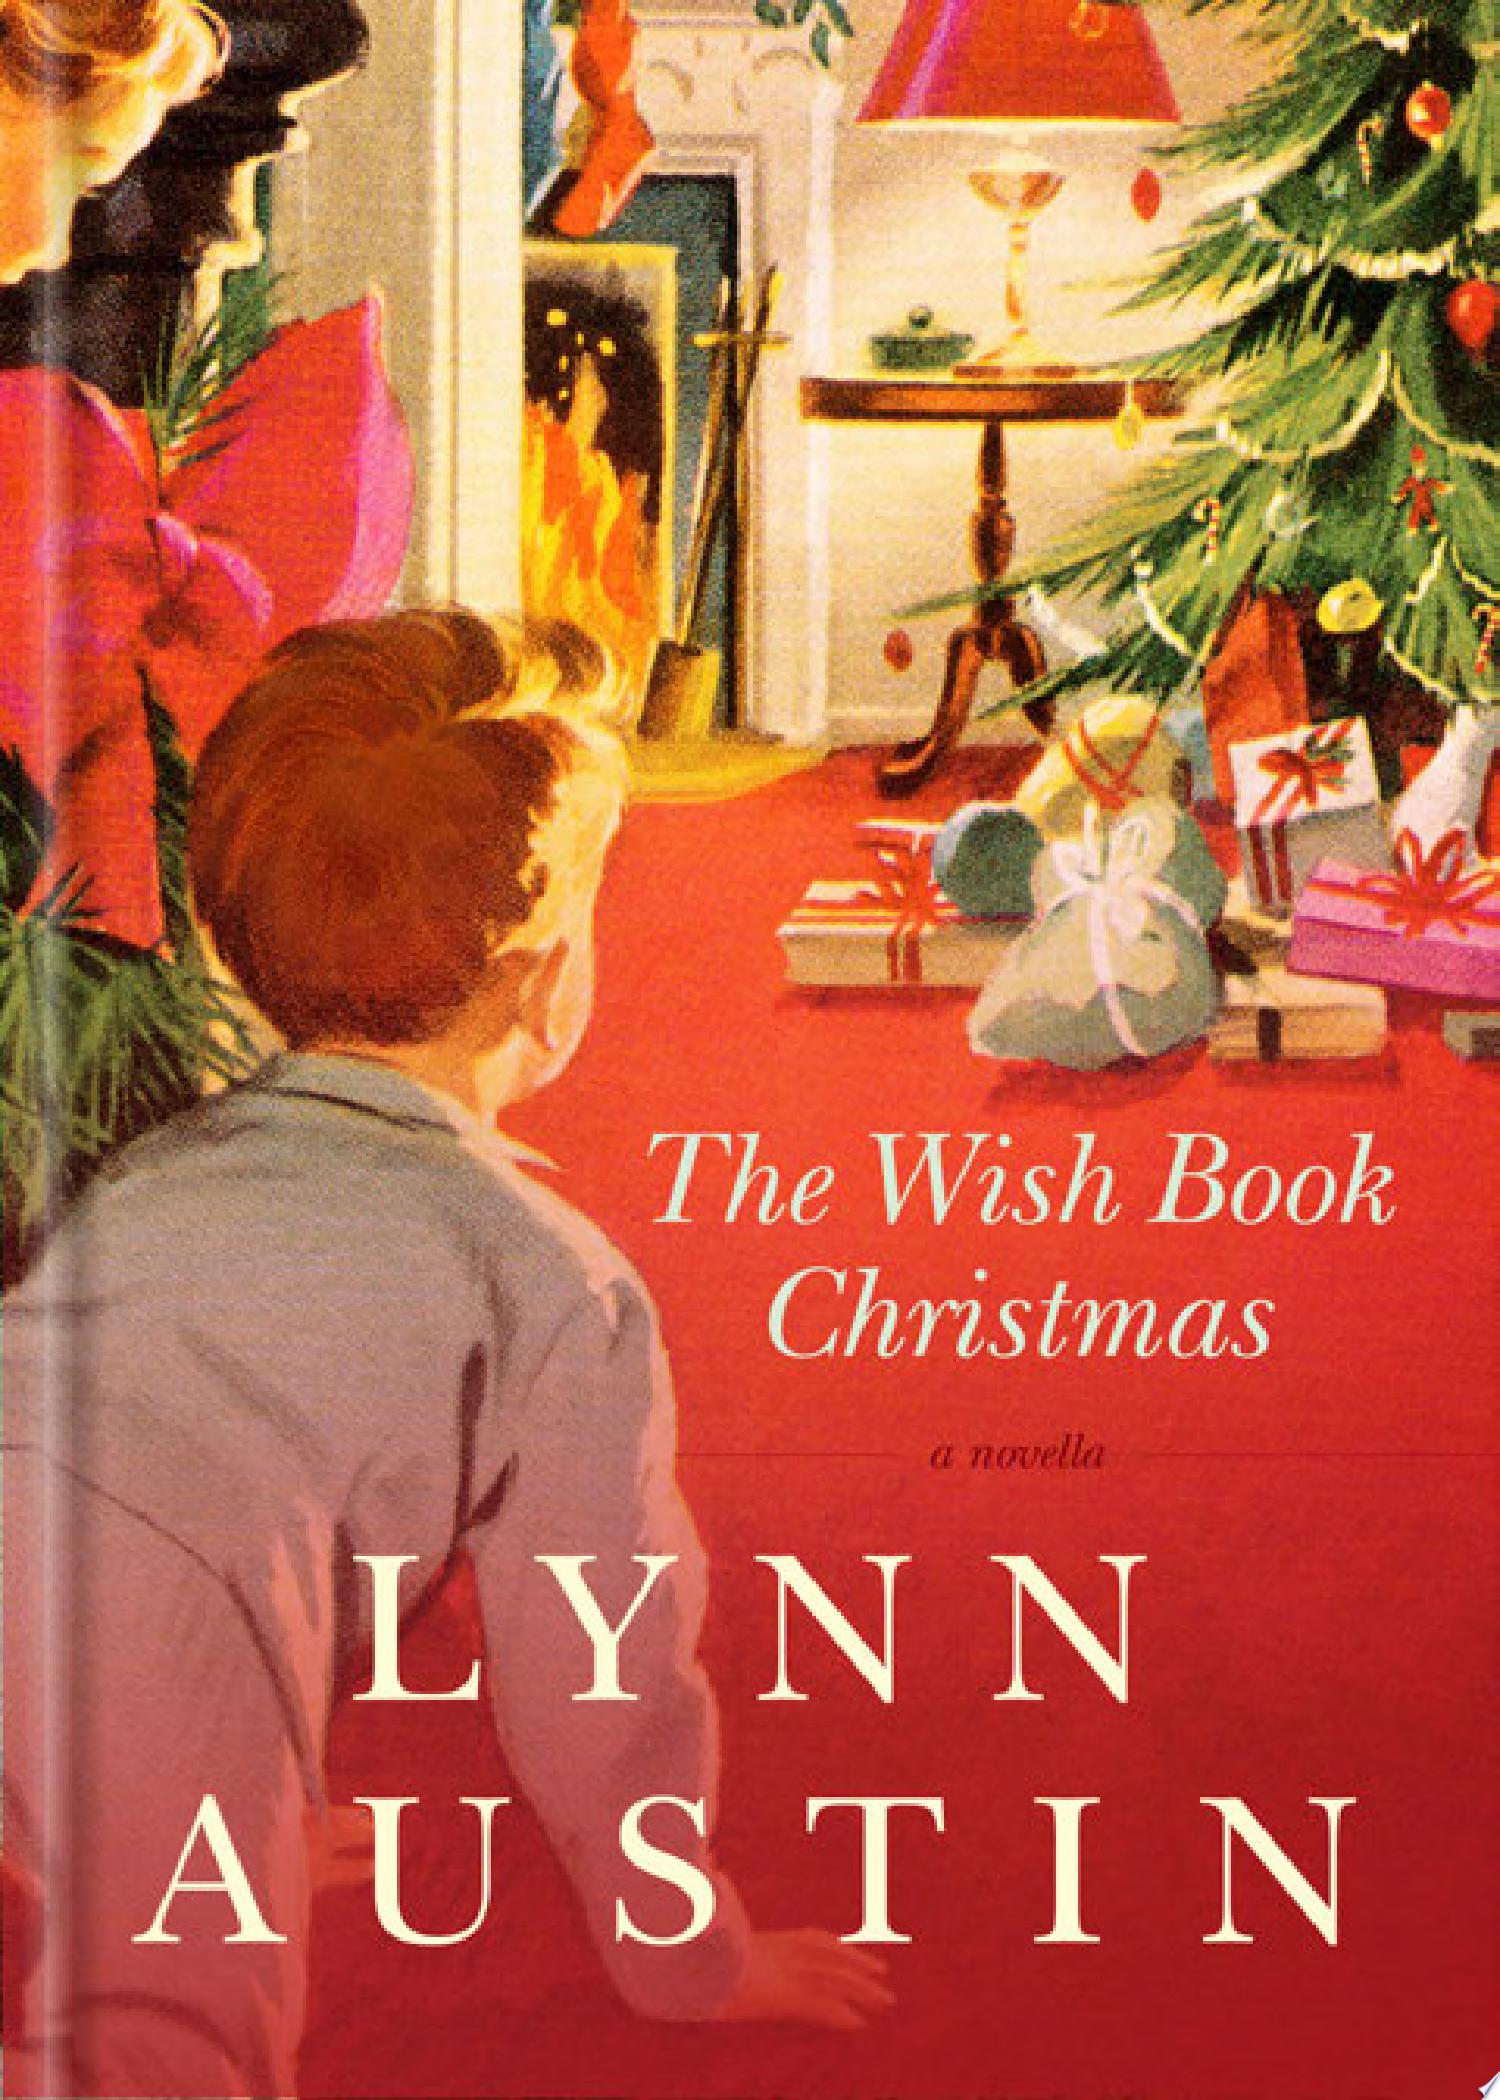 Image for "The Wish Book Christmas"